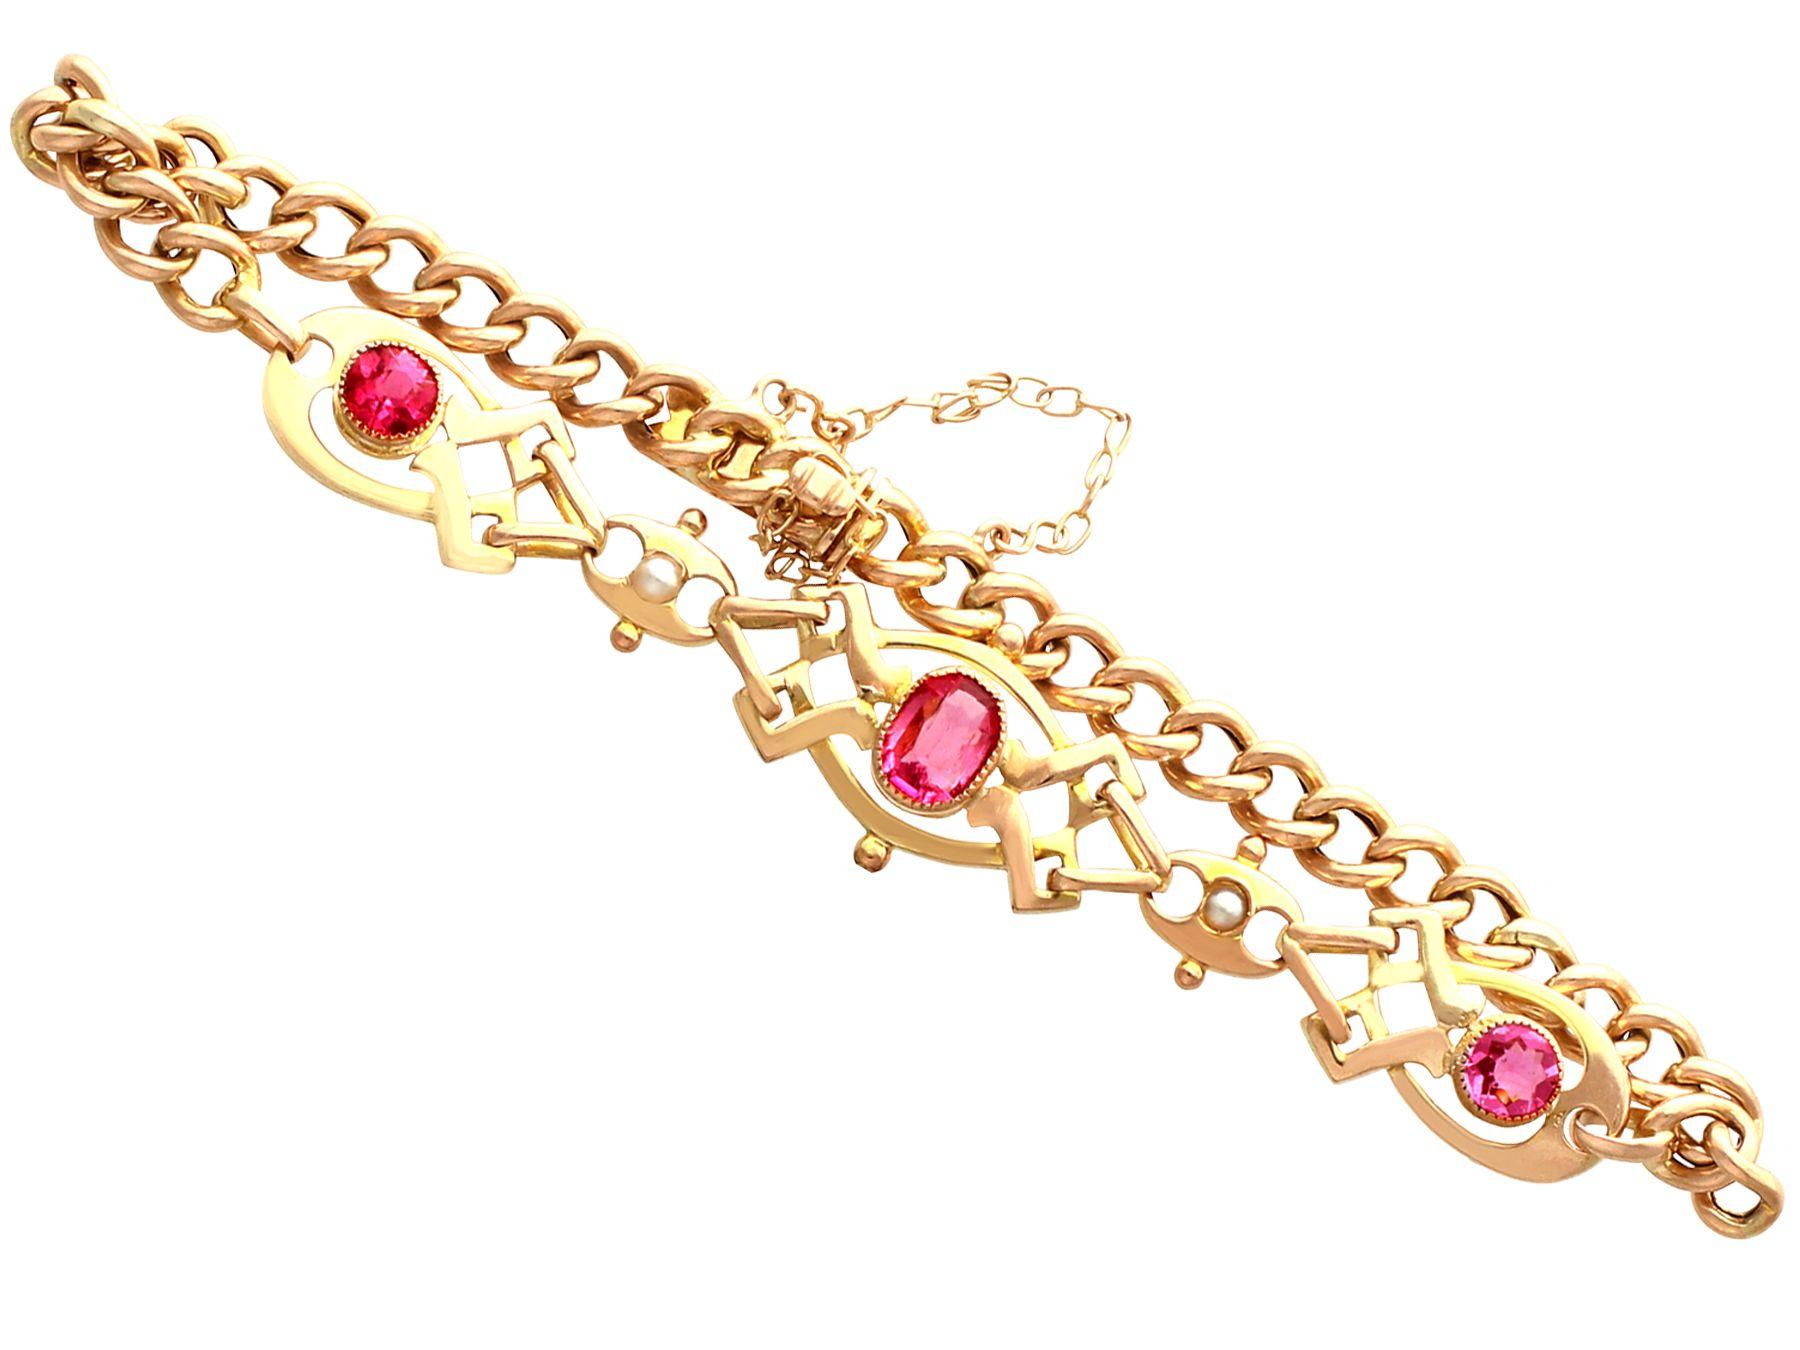 An impressive antique 1.20 Ct pink tourmaline and seed pearl, 9k yellow gold bracelet; part of our diverse antique jewelry and estate jewelry collections.

This fine and impressive pink tourmaline bracelet has been crafted in 9k yellow gold.

The 9k